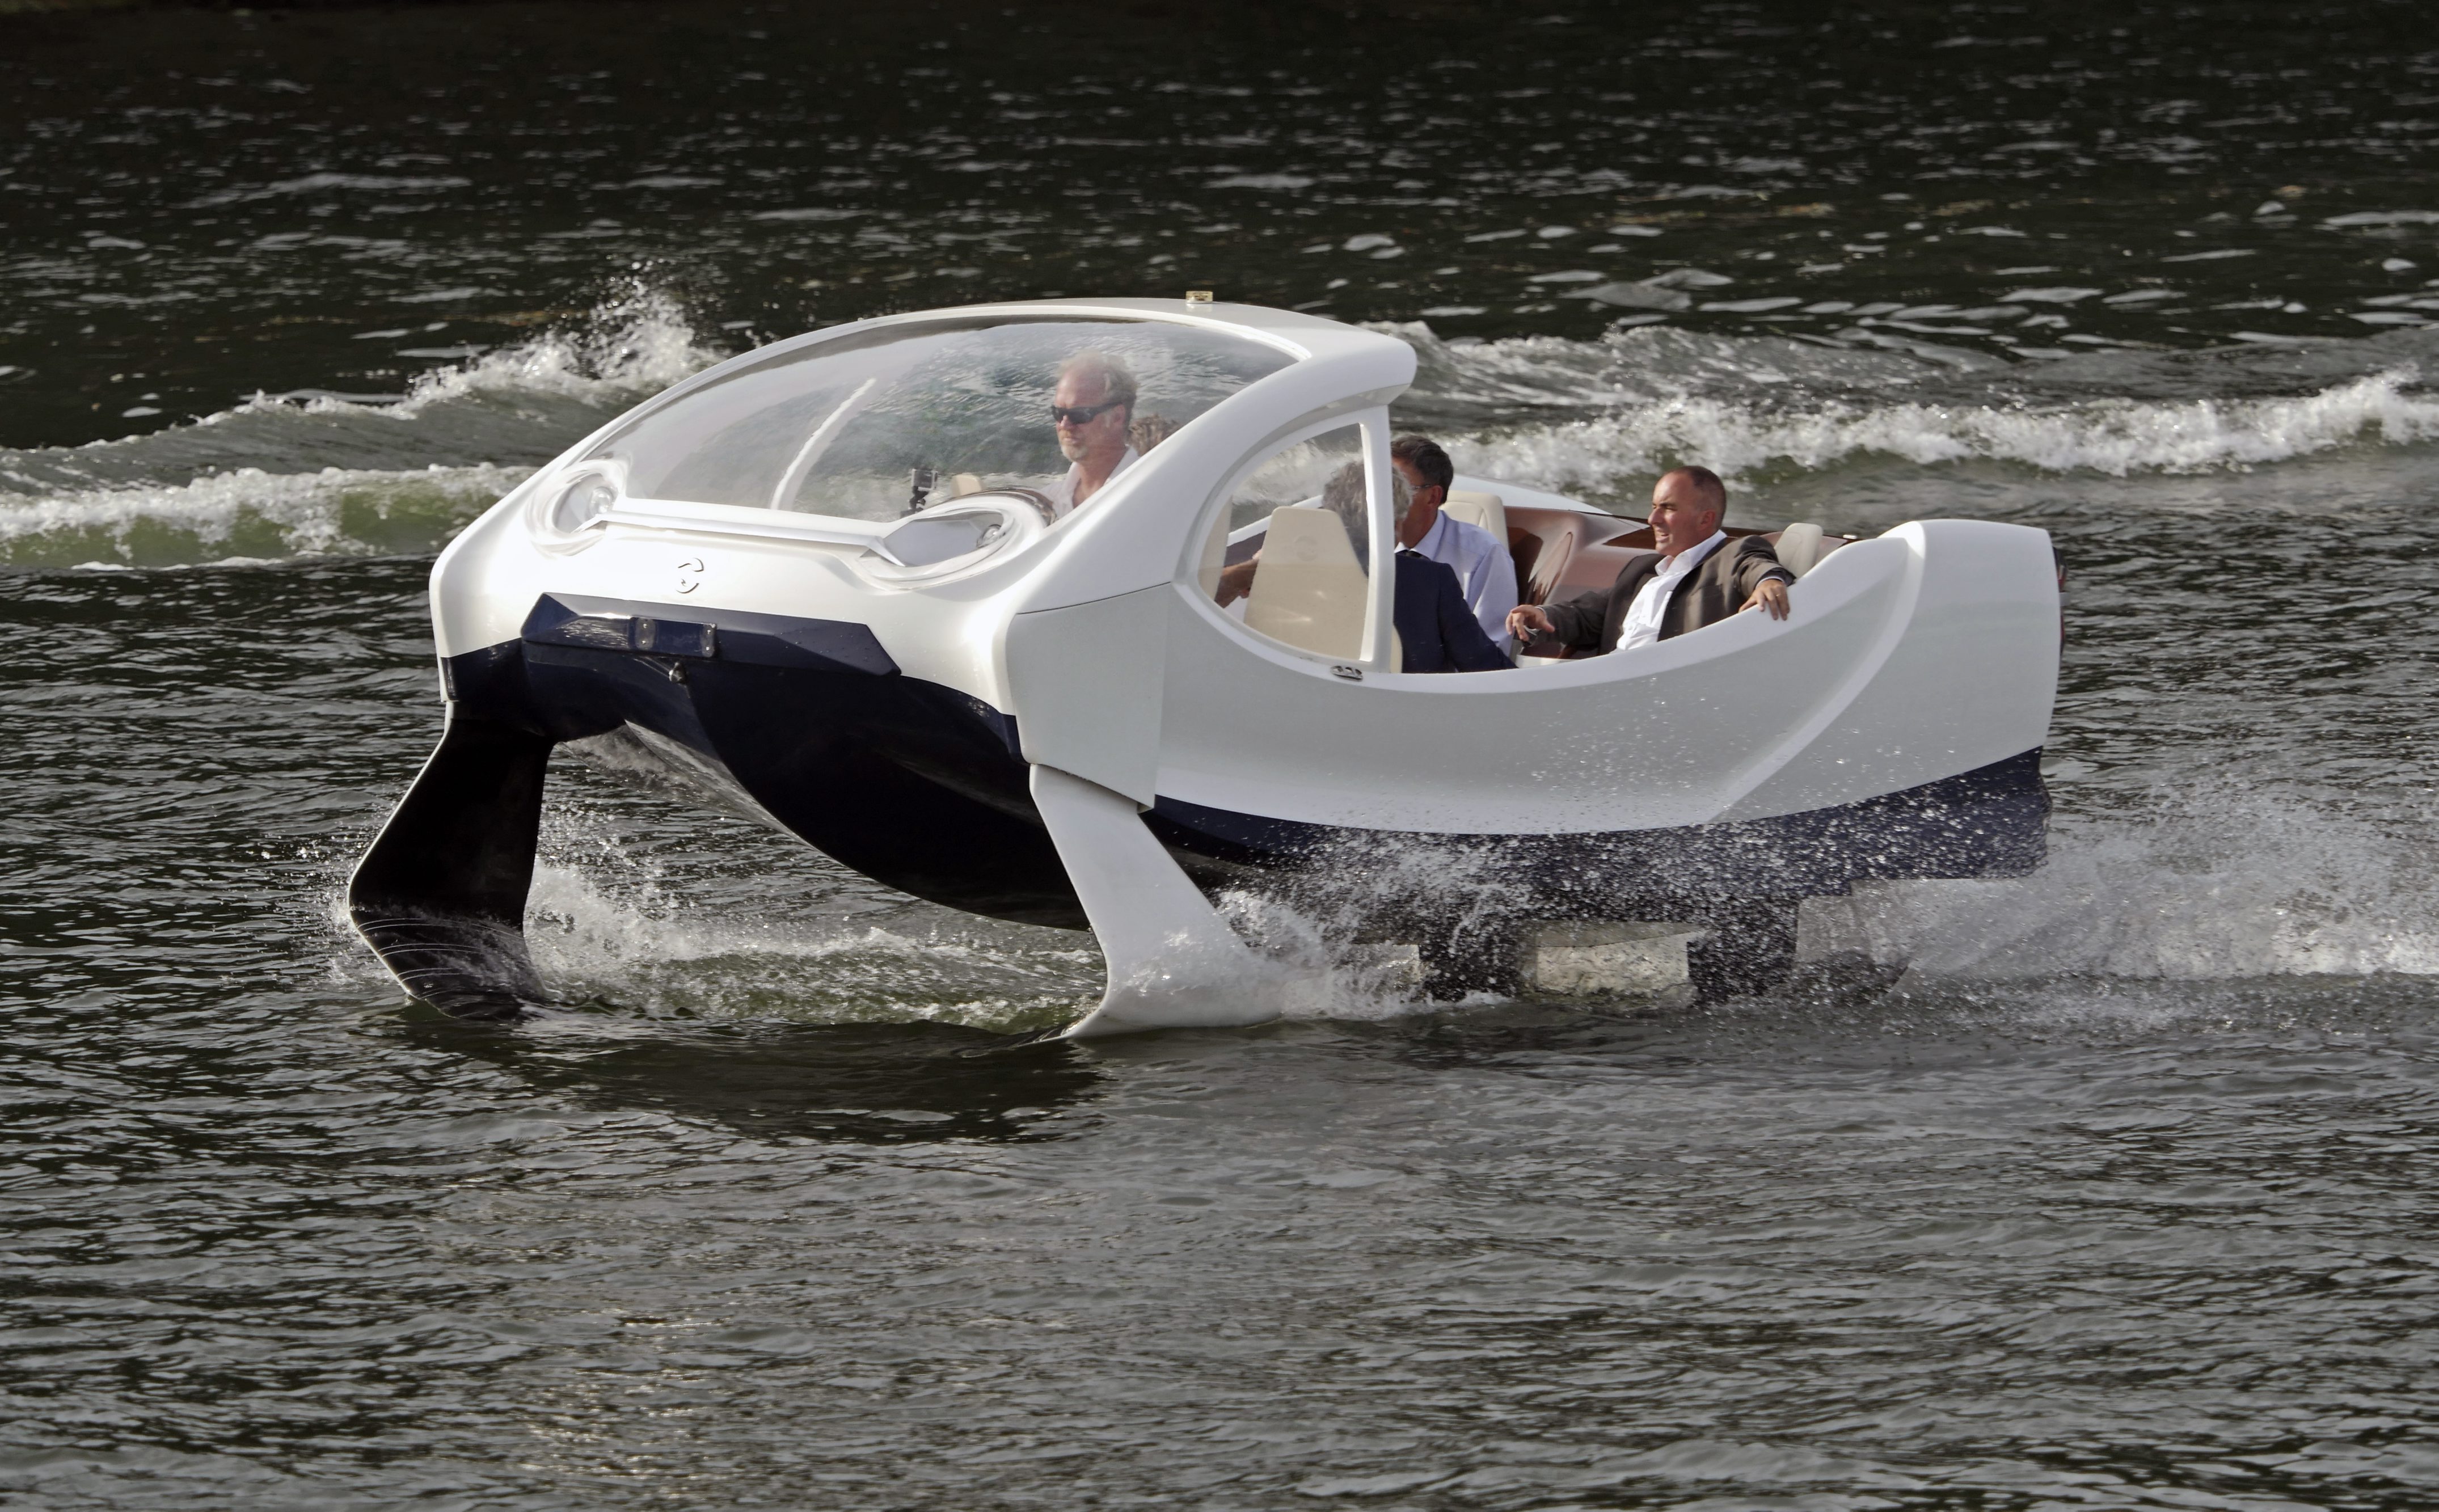 SeaBubbles hovering boat taxi quits Paris for Lake Geneva